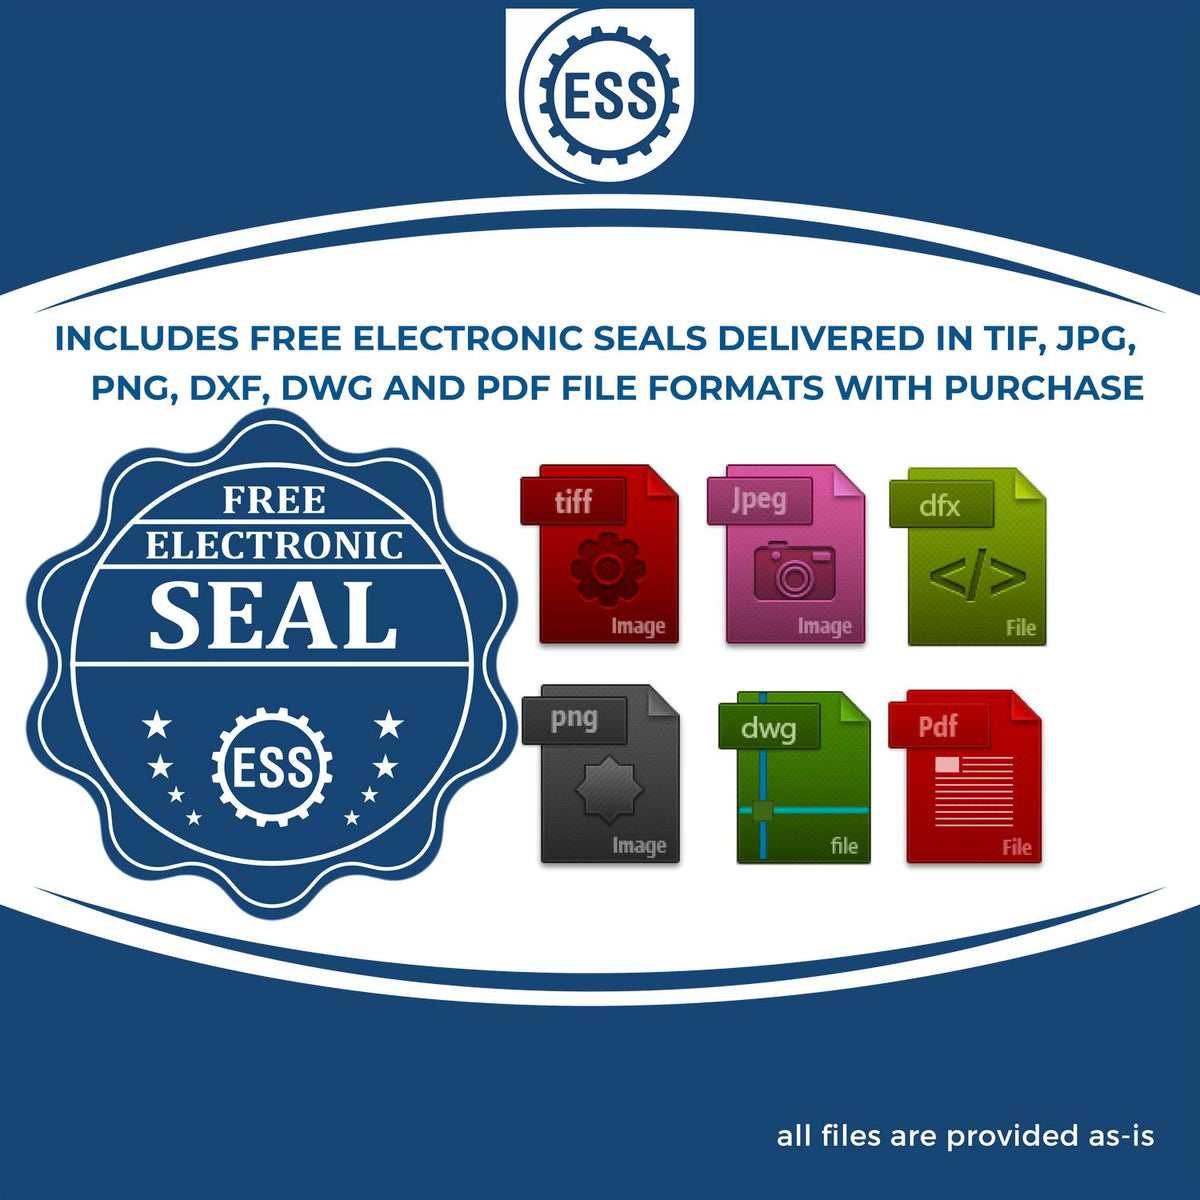 An infographic for the free electronic seal for the Slim Pre-Inked Georgia Land Surveyor Seal Stamp illustrating the different file type icons such as DXF, DWG, TIF, JPG and PNG.